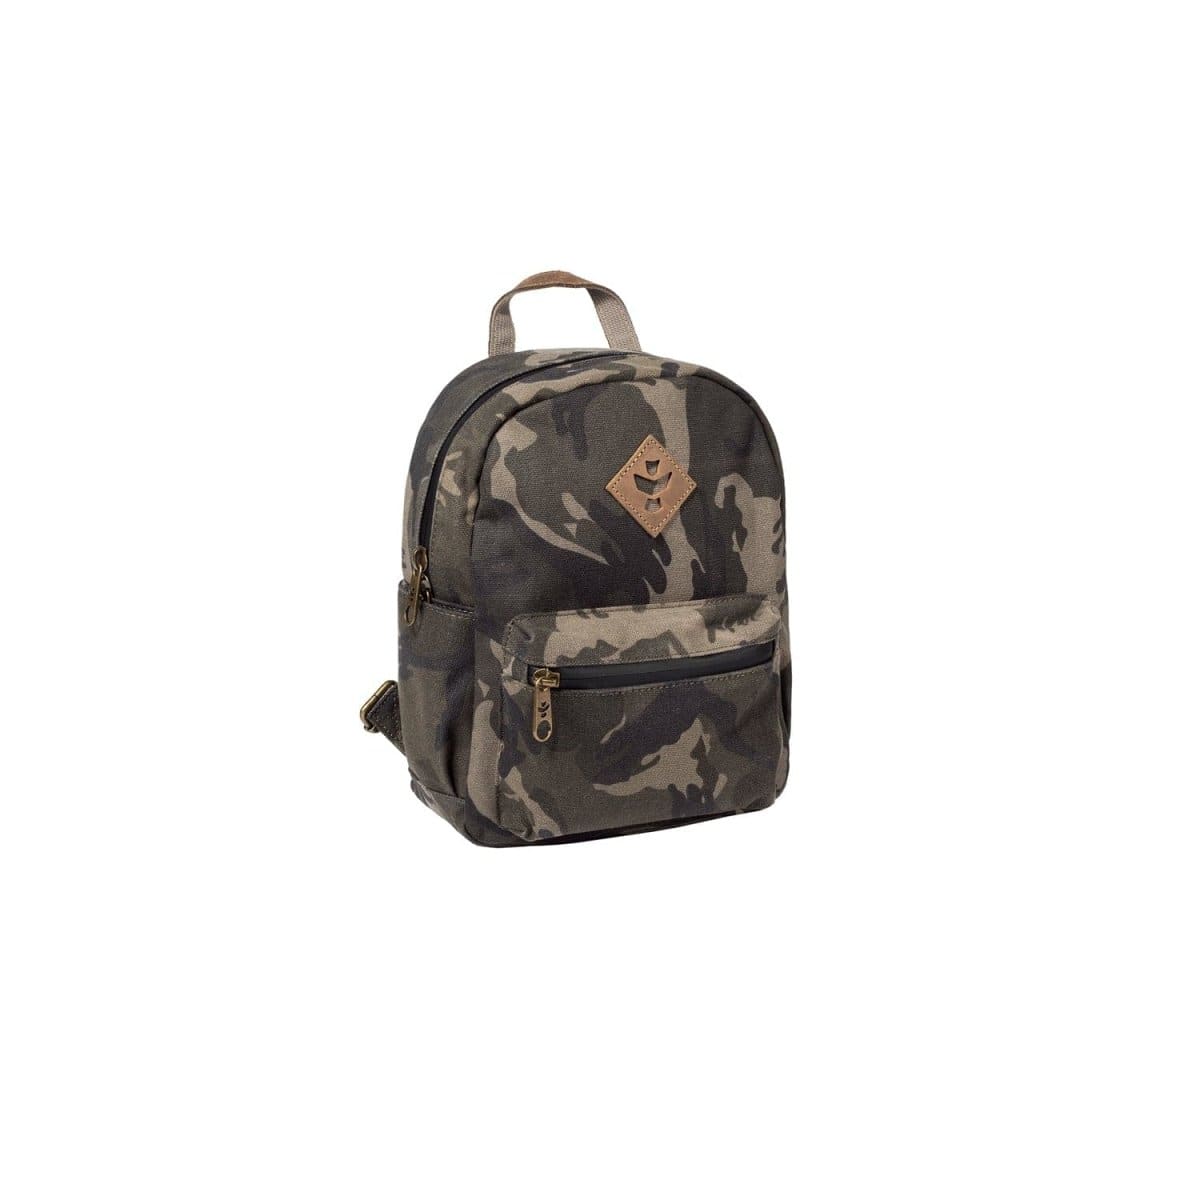 Revelry Supply Travel Bag Camo Brown The Shorty - Smell Proof Mini Backpack